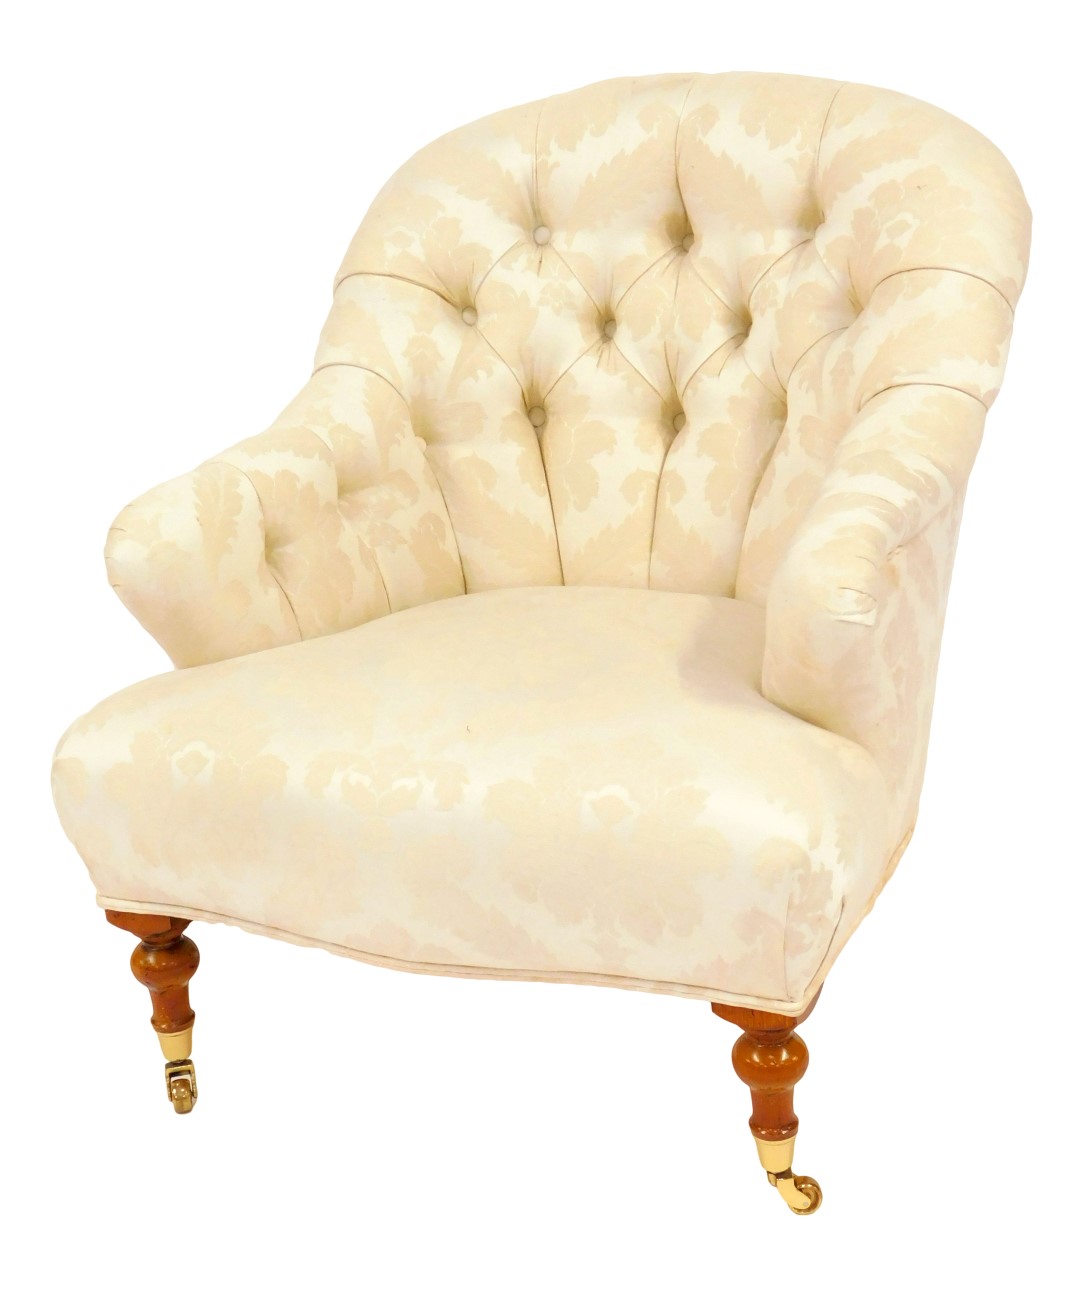 A 20thC armchair, upholstered in cream foliate pattern fabric, with a curved button back, shaped fro